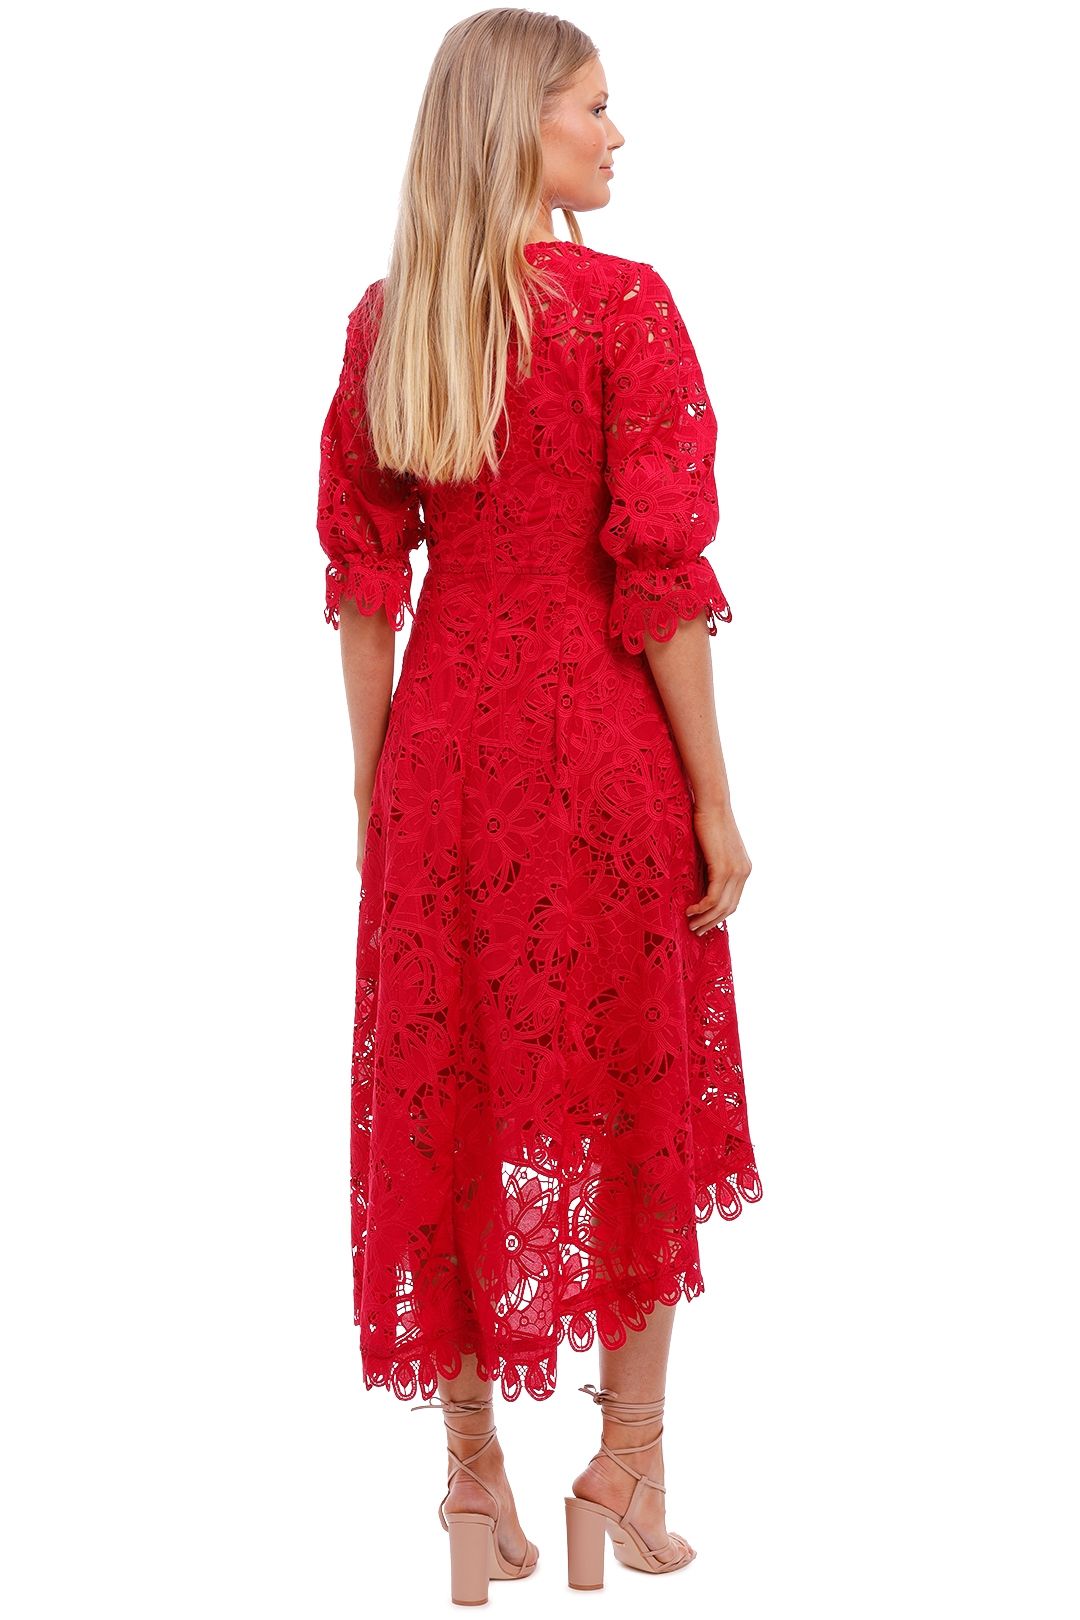 Moss and Spy Macgraw Short Sleeve Dress red